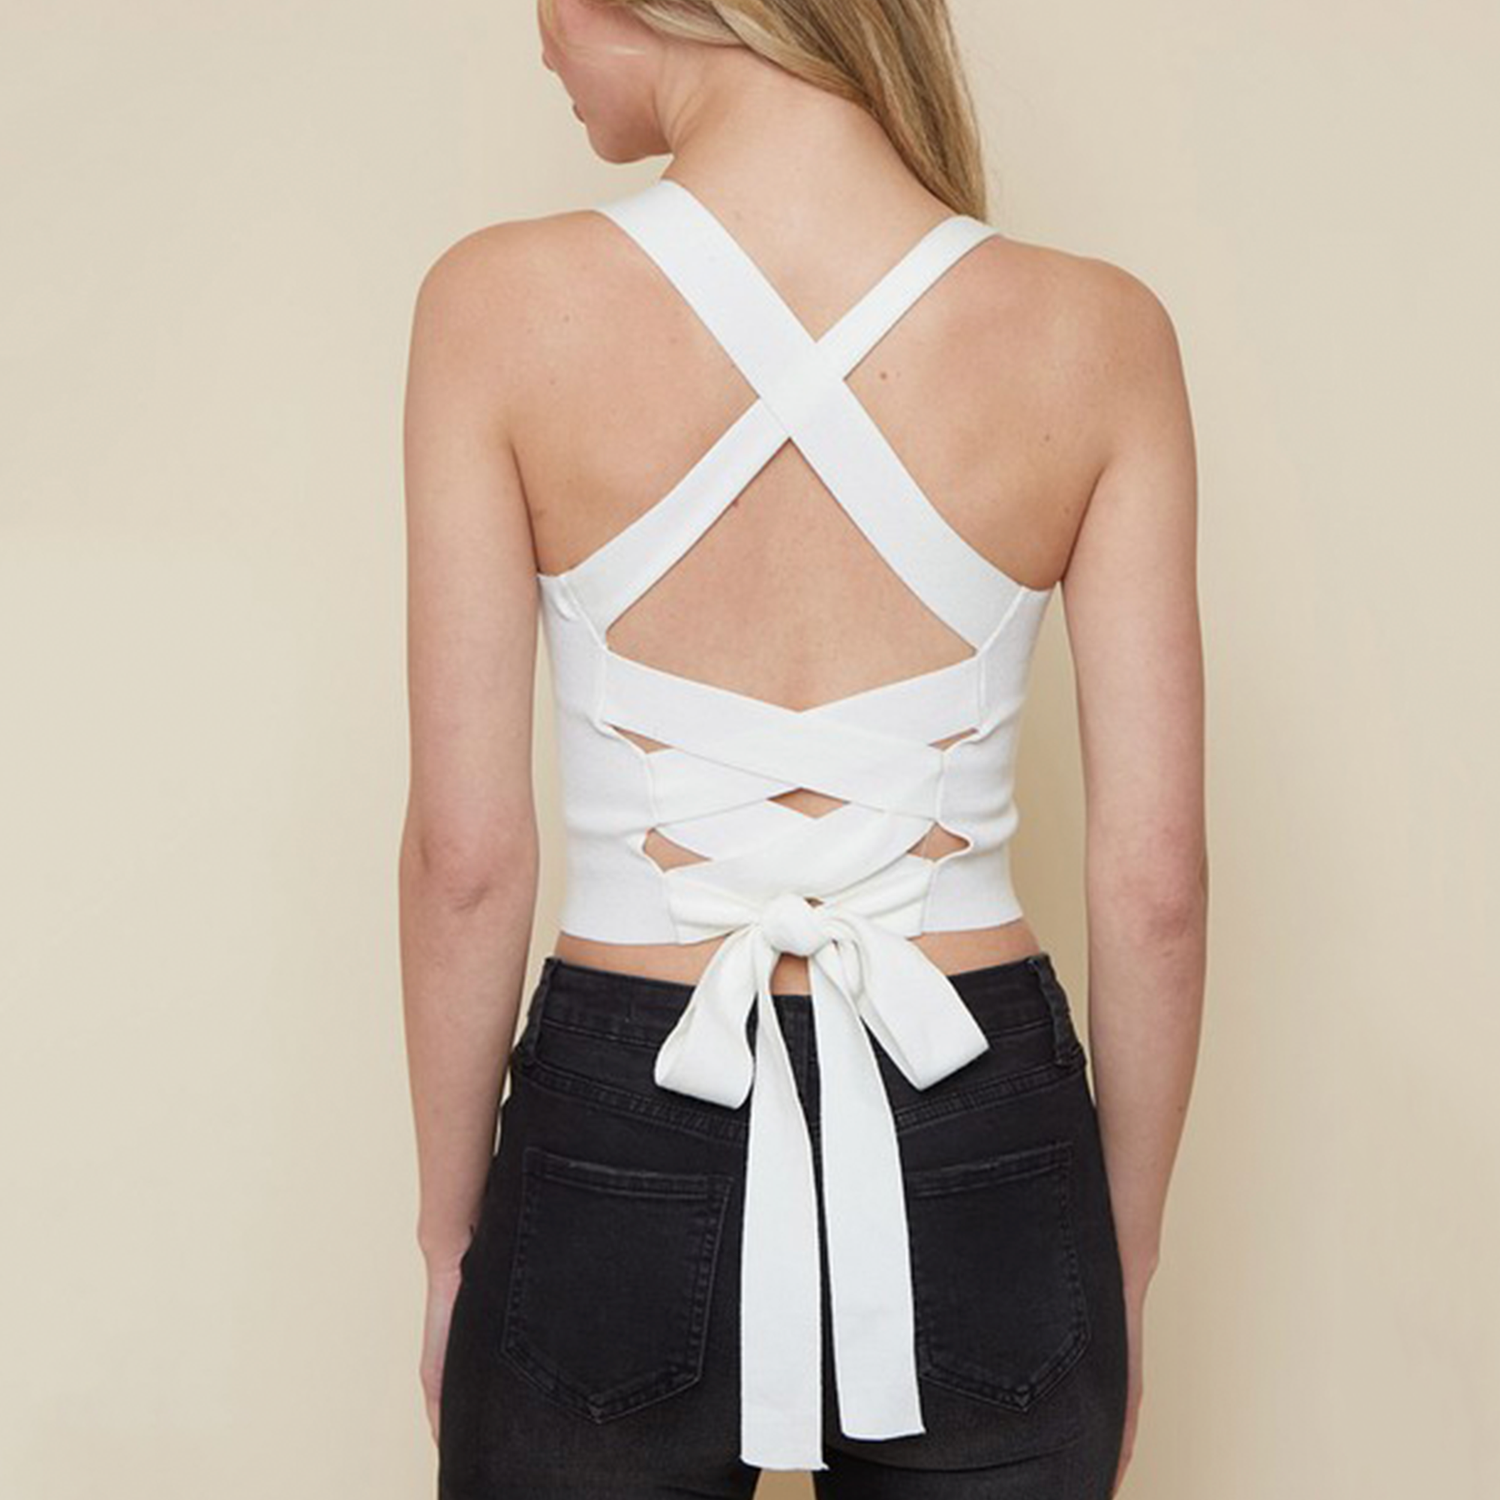 Criss Cross Back Ribbed Knit Cami. This top is a summer vacation must-have! The knitted fabric transitions flawlessly from spring to summer, combined with a fashionable tie-back style in classic white or black. Incredibly soft and incredibly stylish!